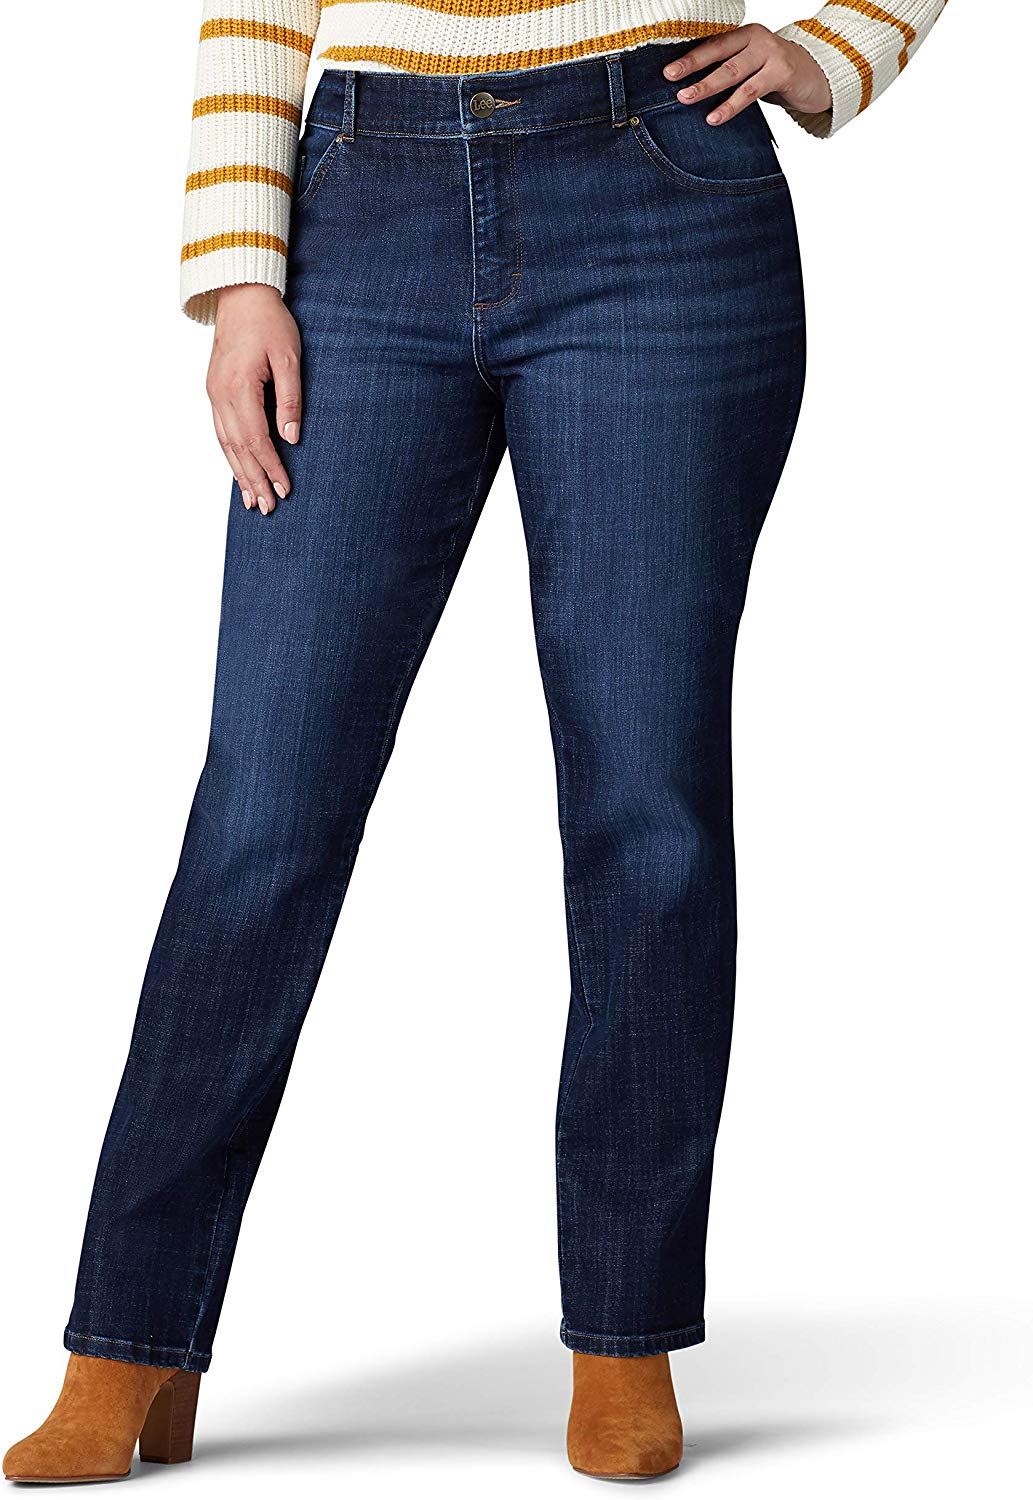 Lee + Relaxed Fit Straight Leg Jean